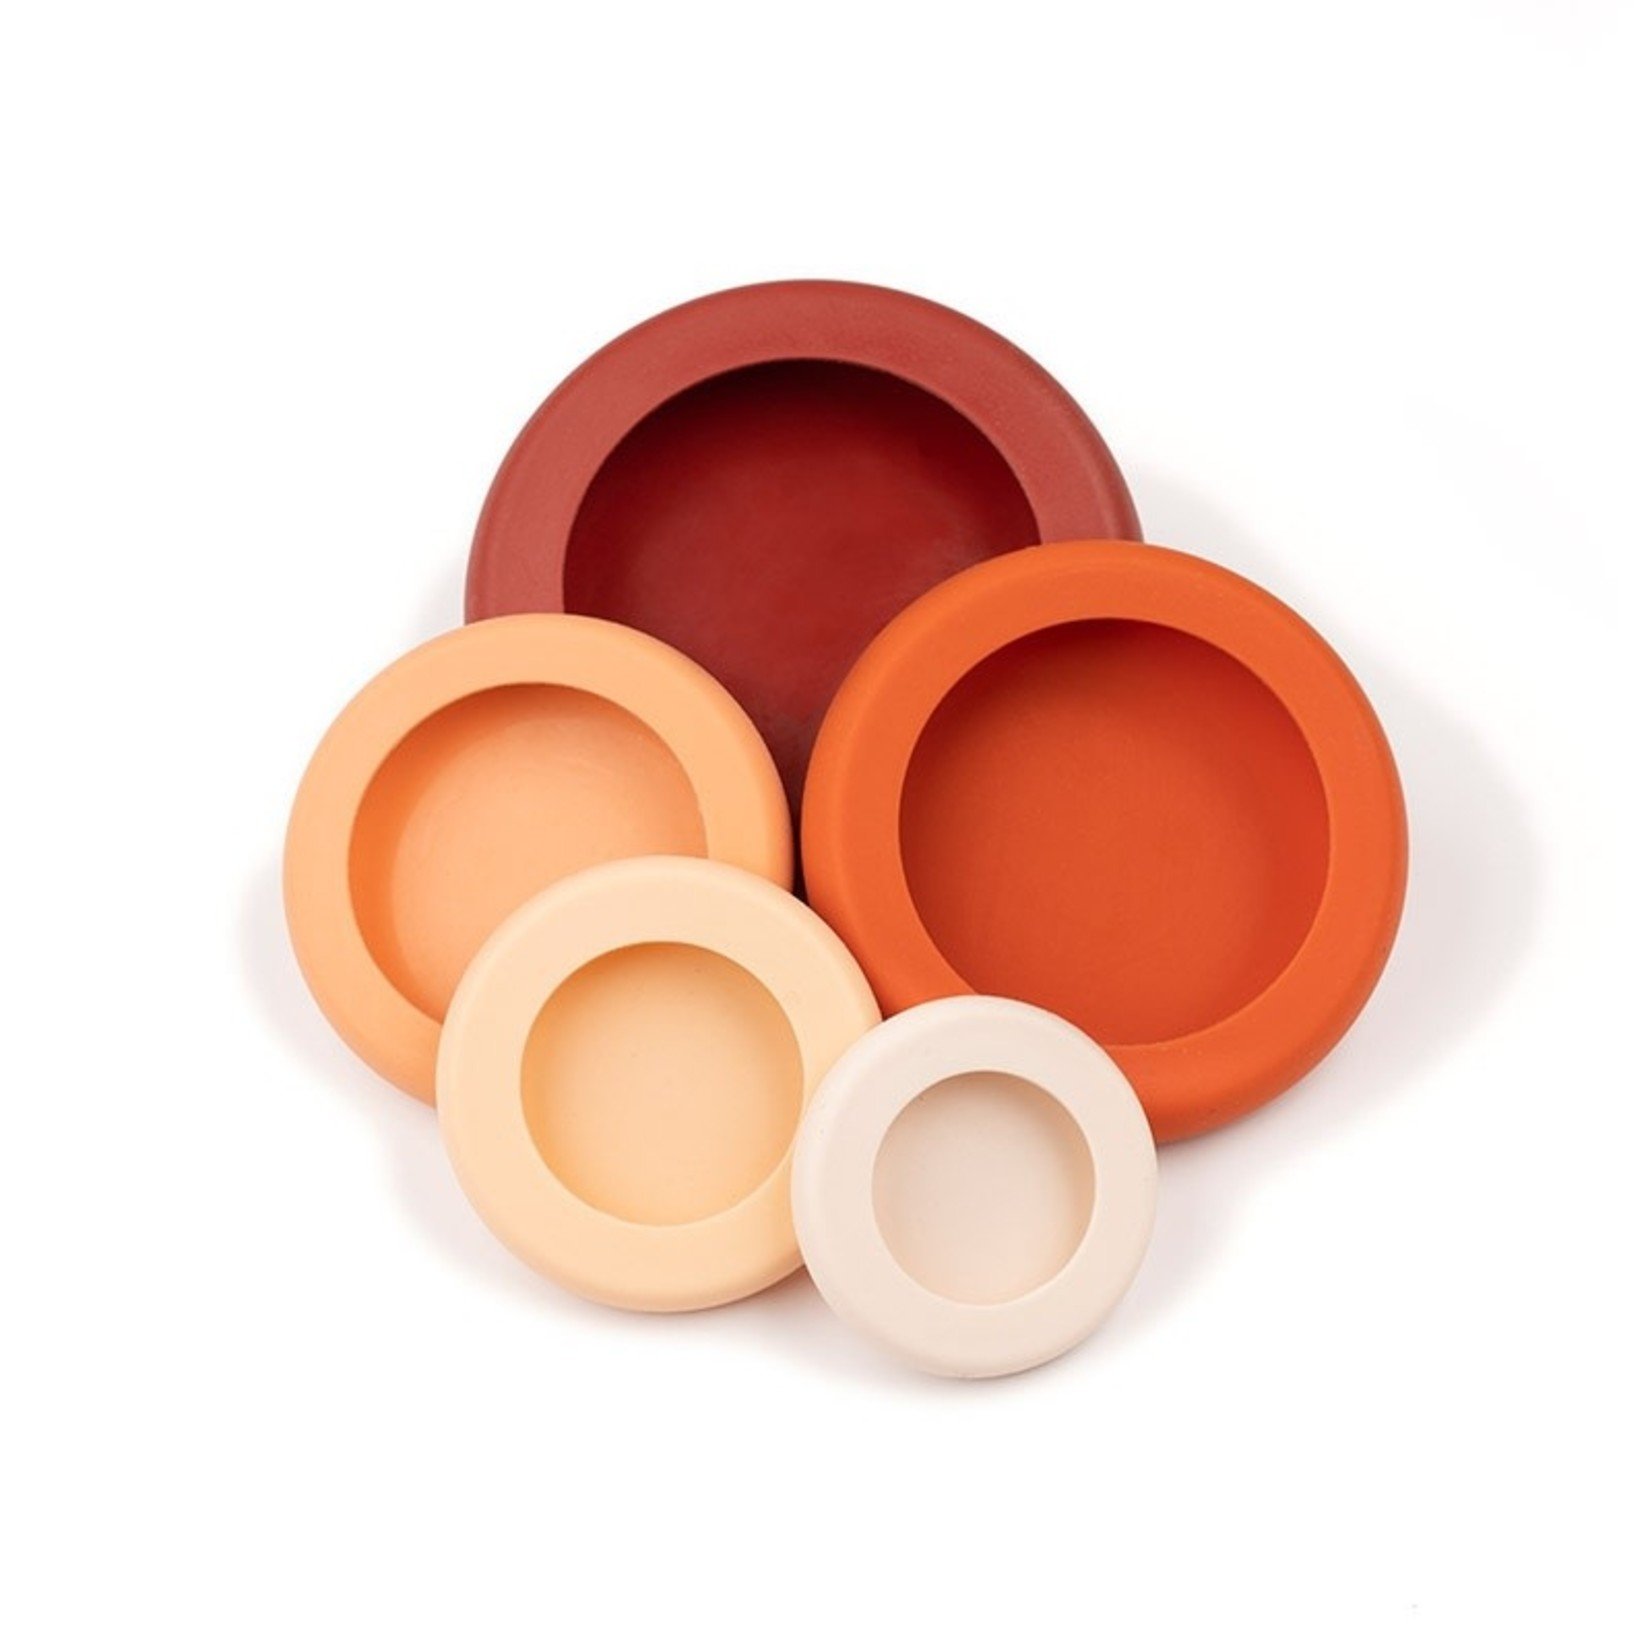 Food Huggers Set of 5 Warm Colors – Luxe